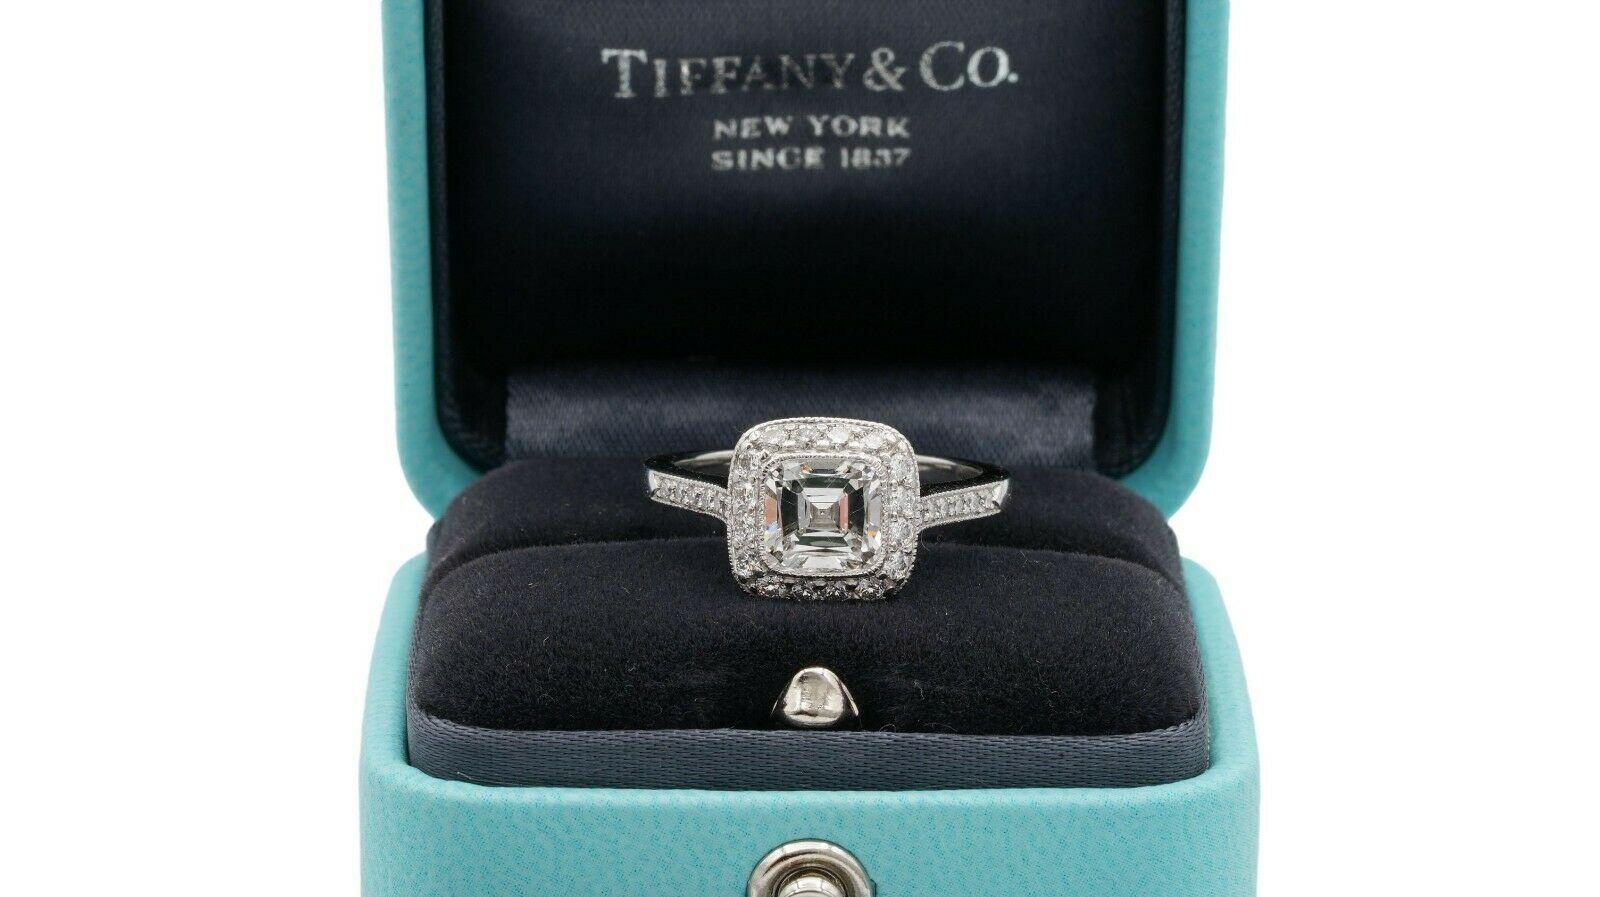 Tiffany & Co Cushion Brilliant Engagement Ring from the “Legacy” collection featuring a 1.50carat center, G color, VS1 clarity, finely crafted in Platinum featuring 42 dazzling bead-set diamonds in a full bezel millgrain design halo and half-way